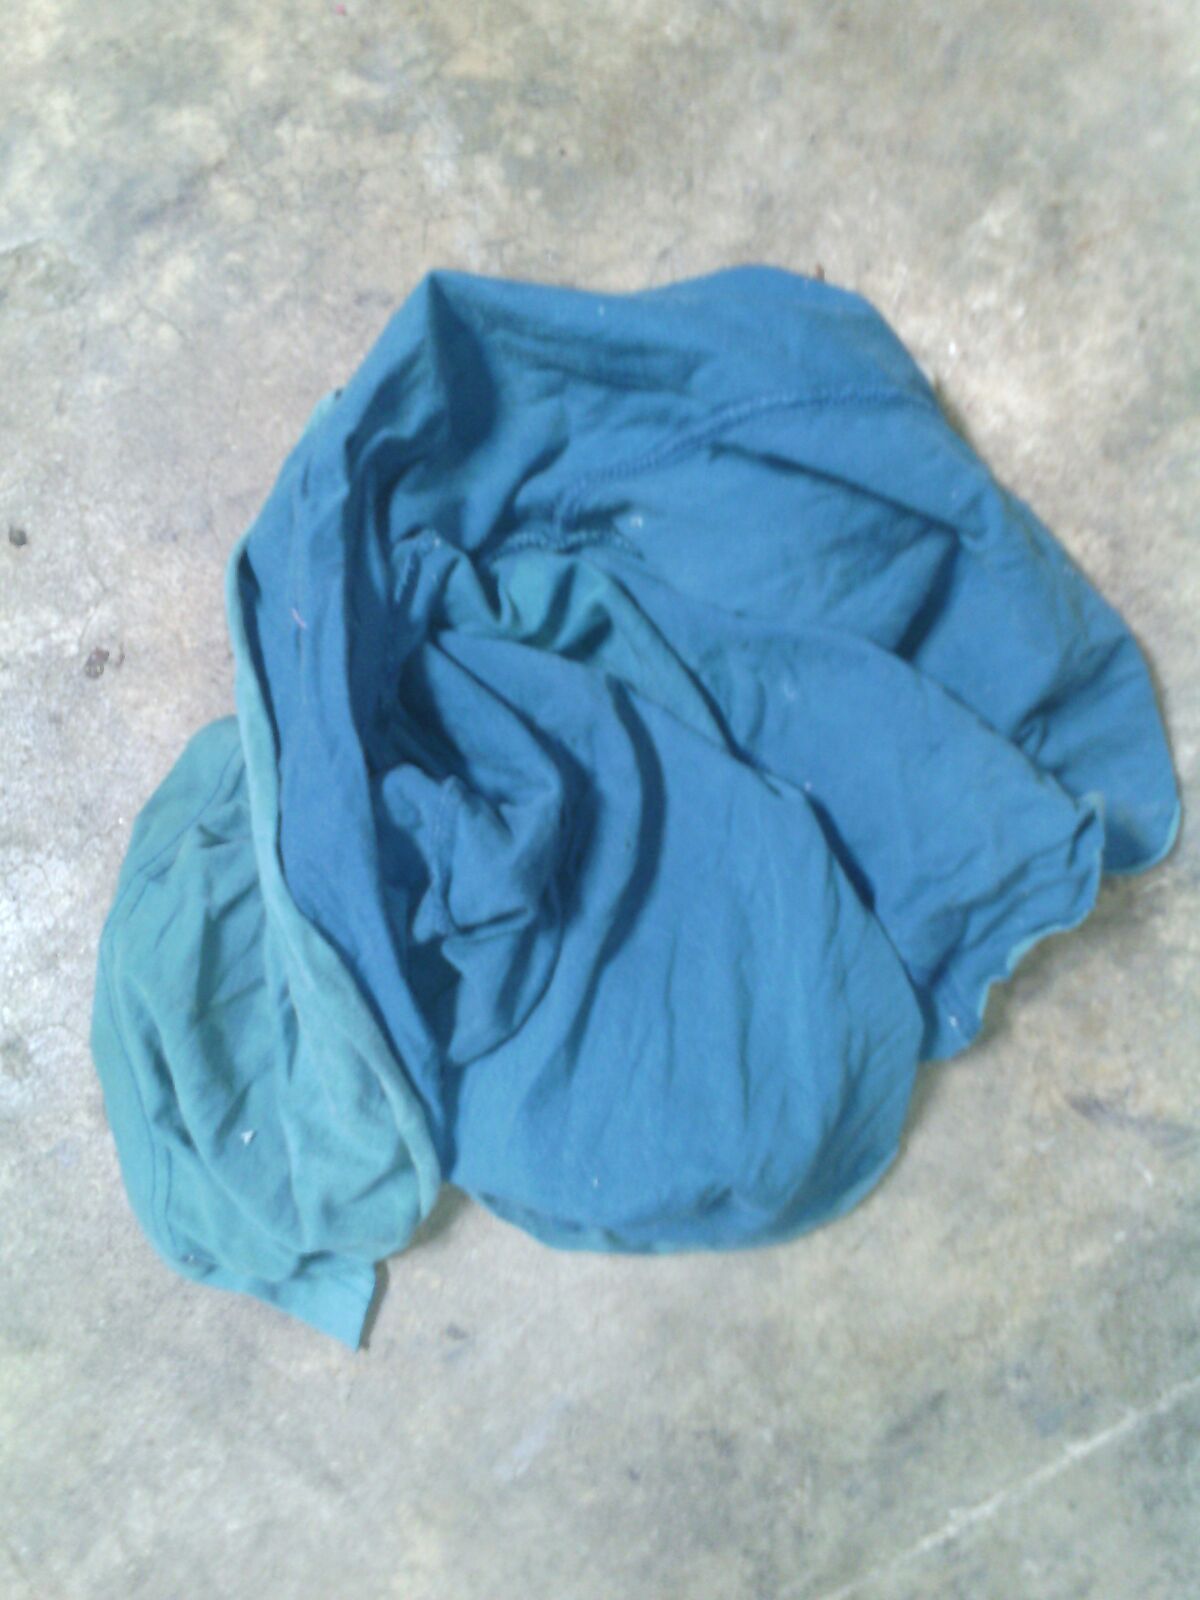 Wipers Cloth cotton waste